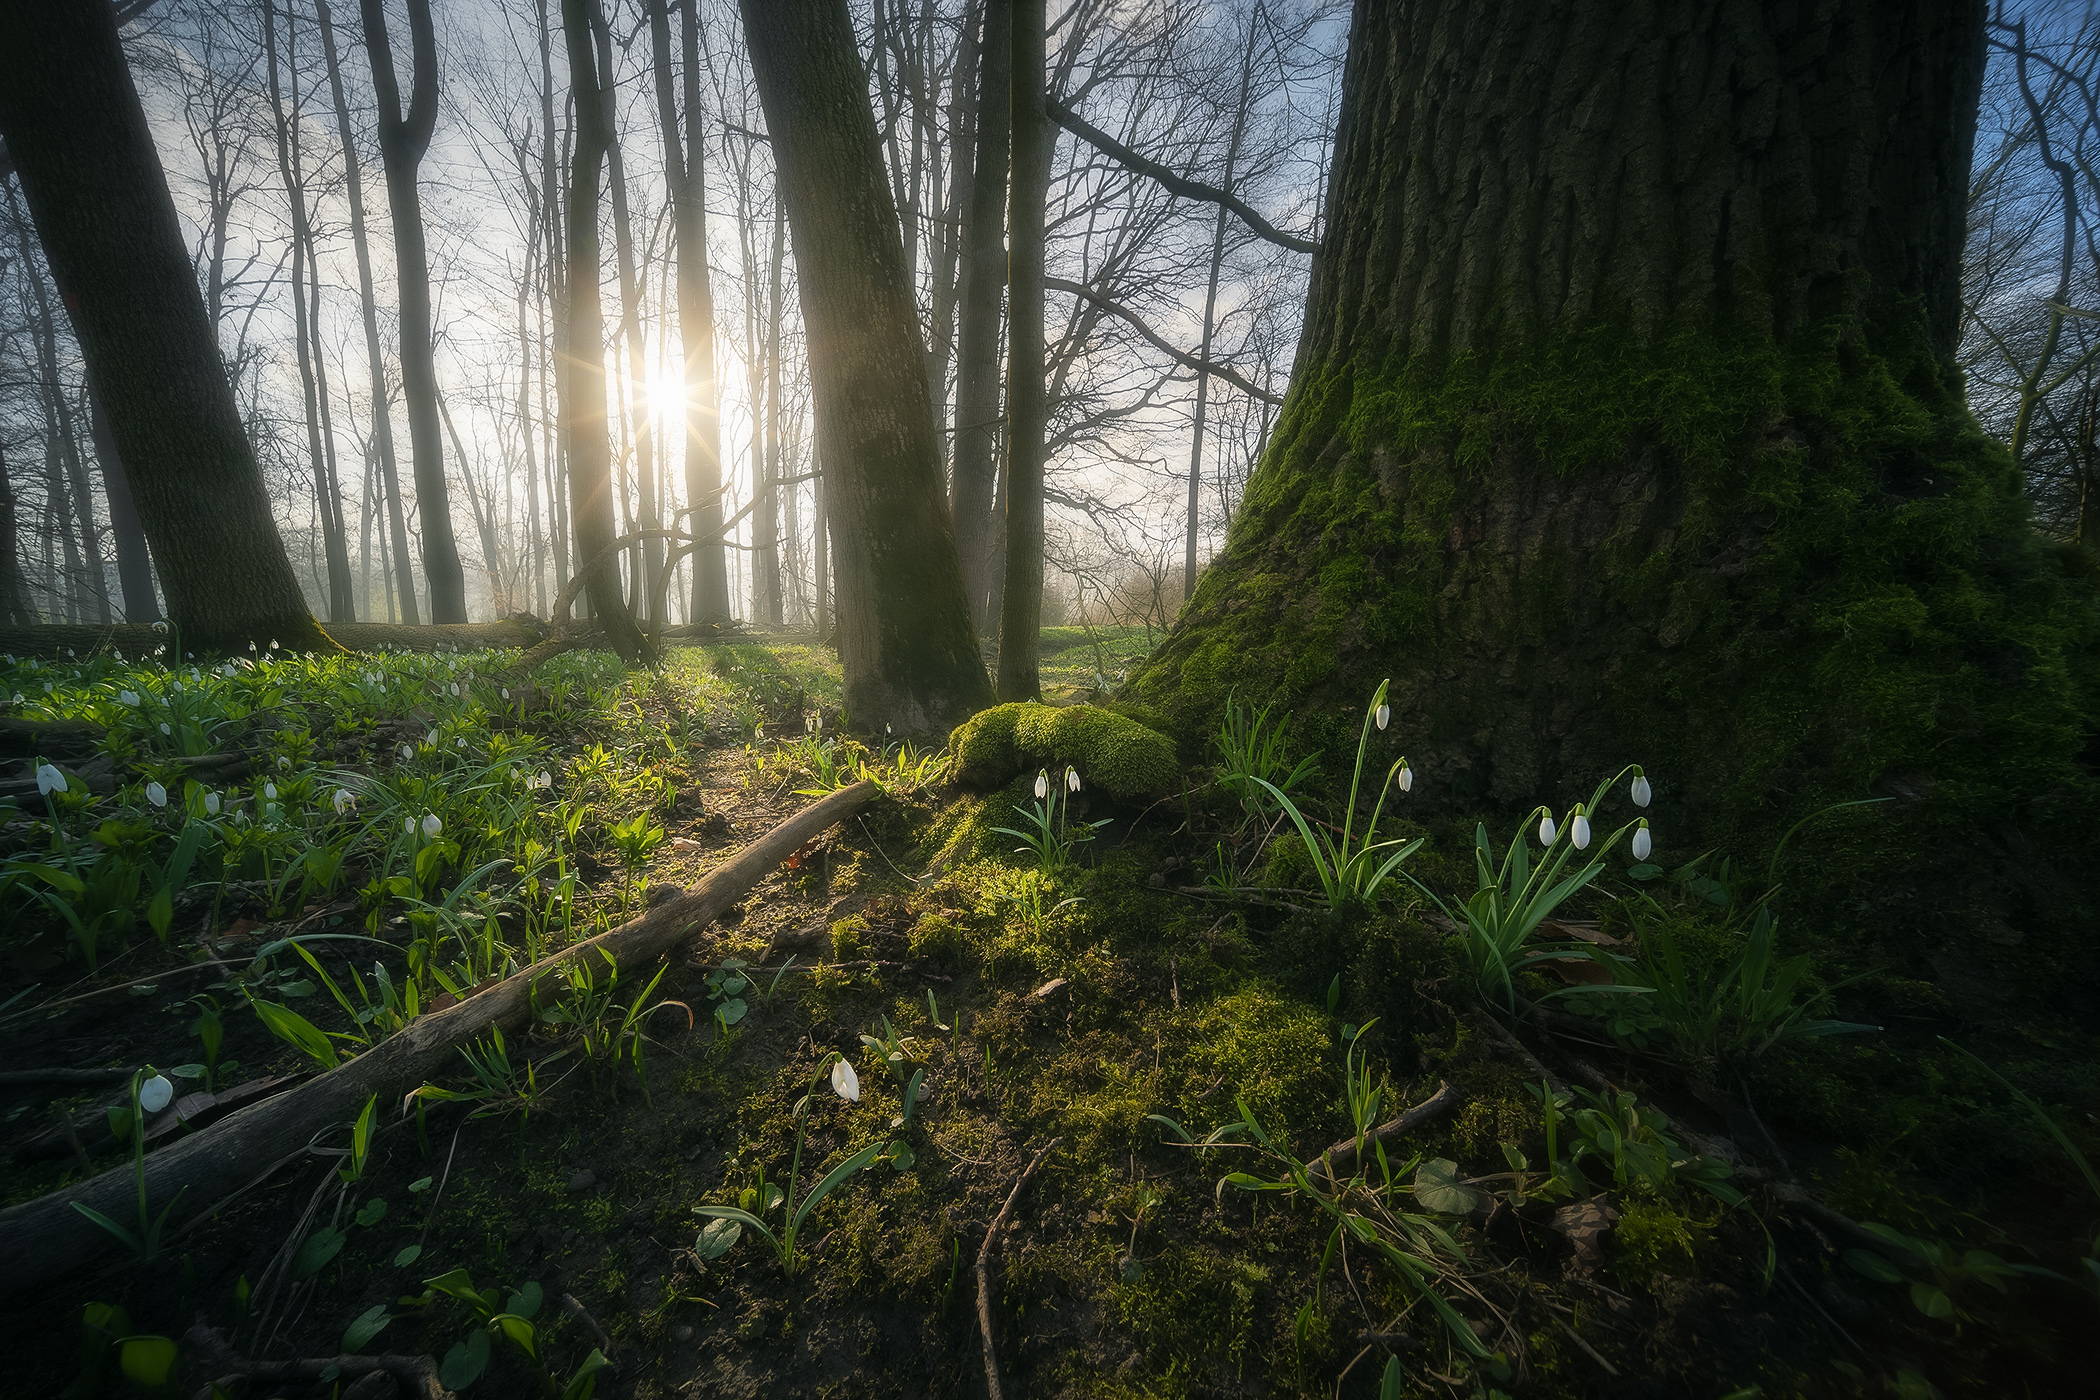 Snowdrops in Mossy Forest